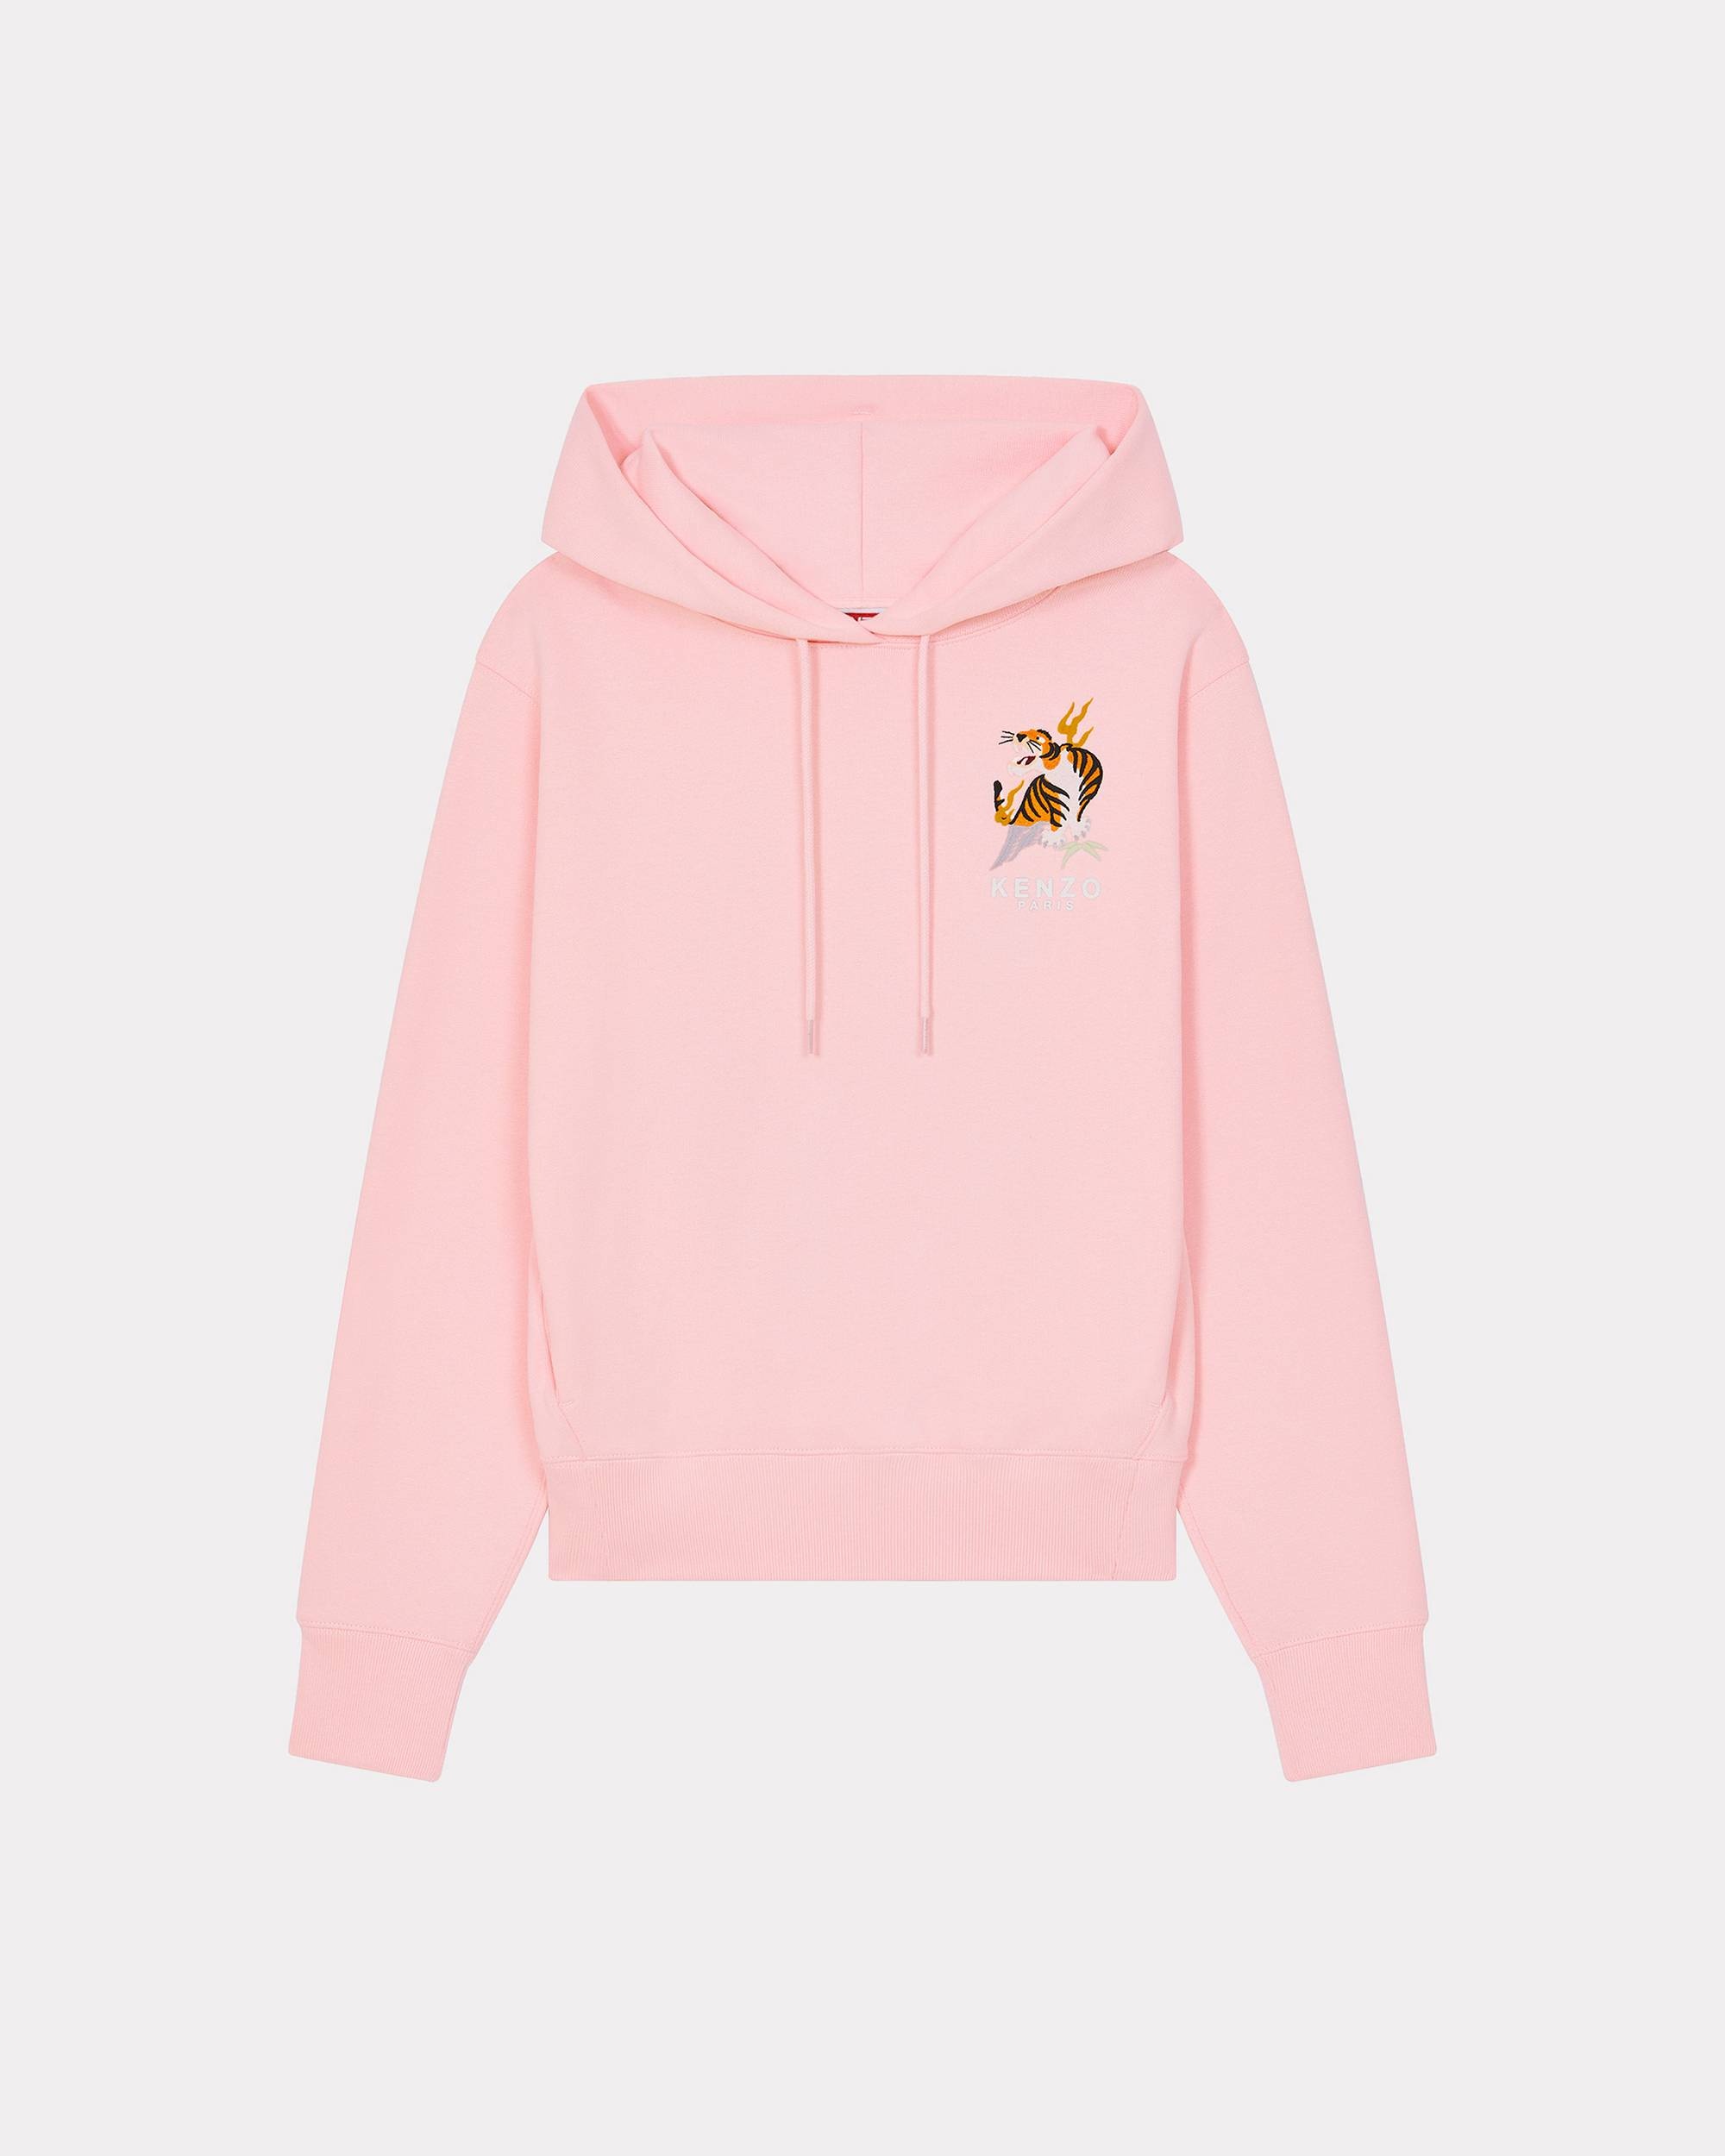 'Year of the Dragon' embroidered classic hoodie sweatshirt - 1